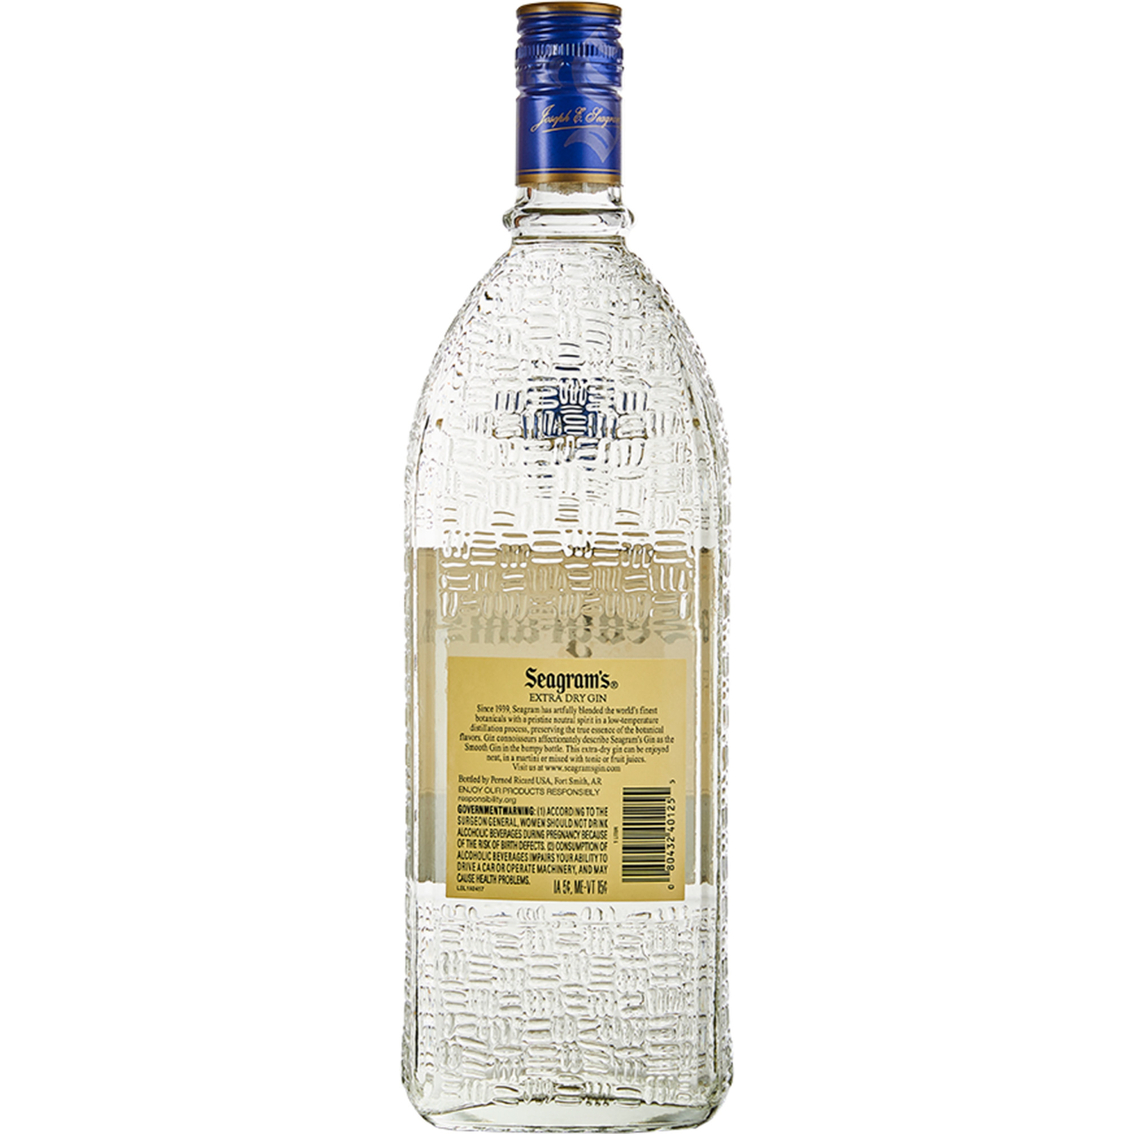 Seagram's Extra Dry Gin 1L - Image 2 of 2